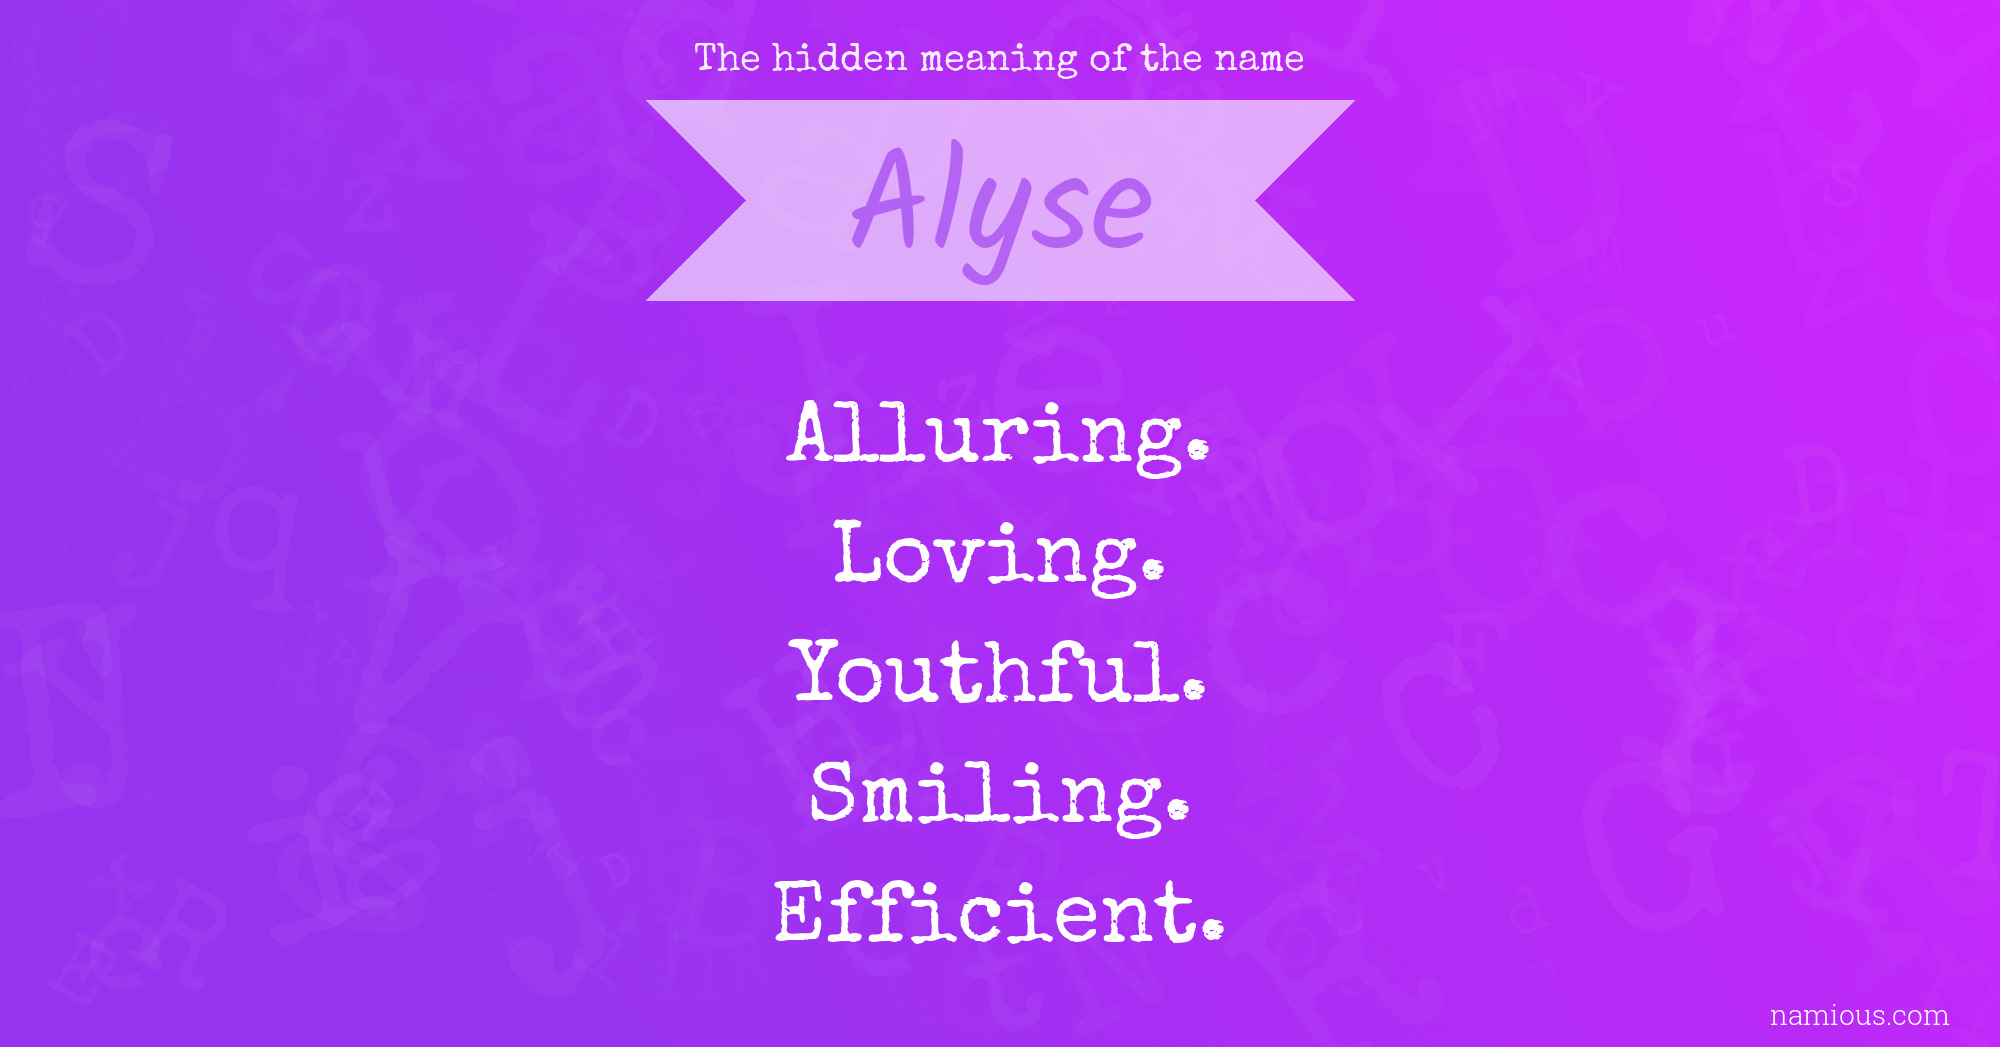 The hidden meaning of the name Alyse